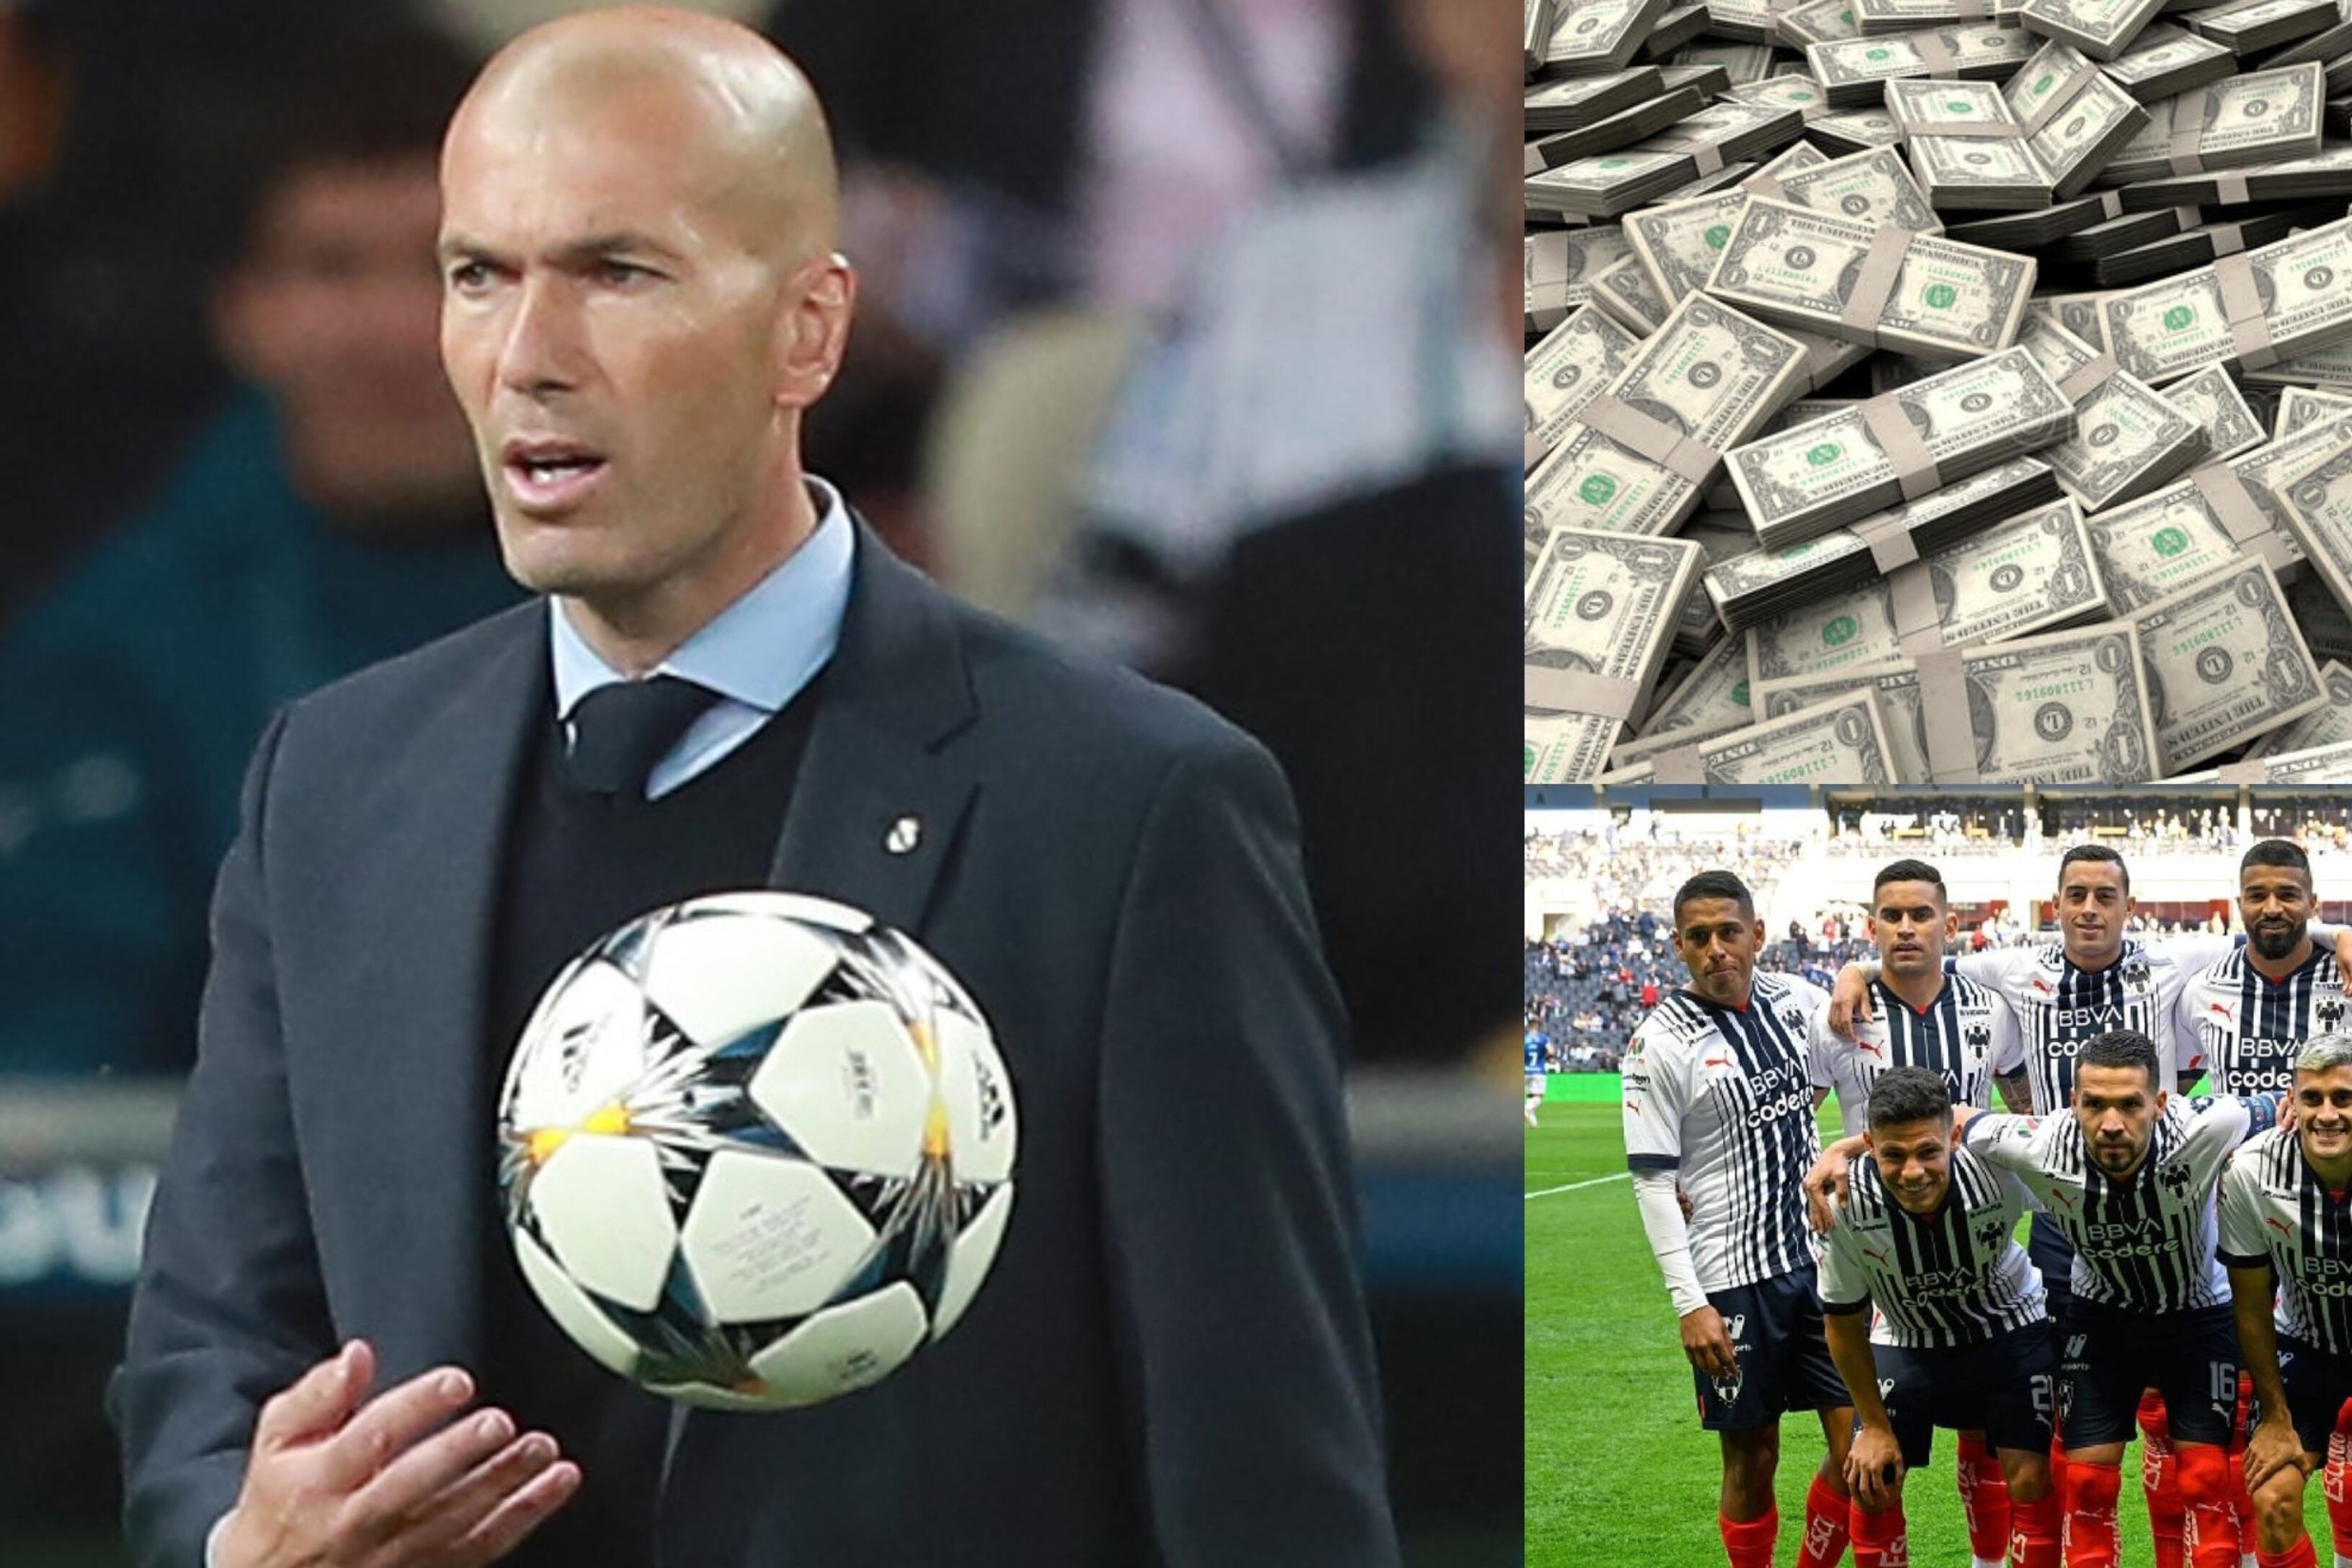 Rayados goes for everything, what they would pay to have Zidane as coach